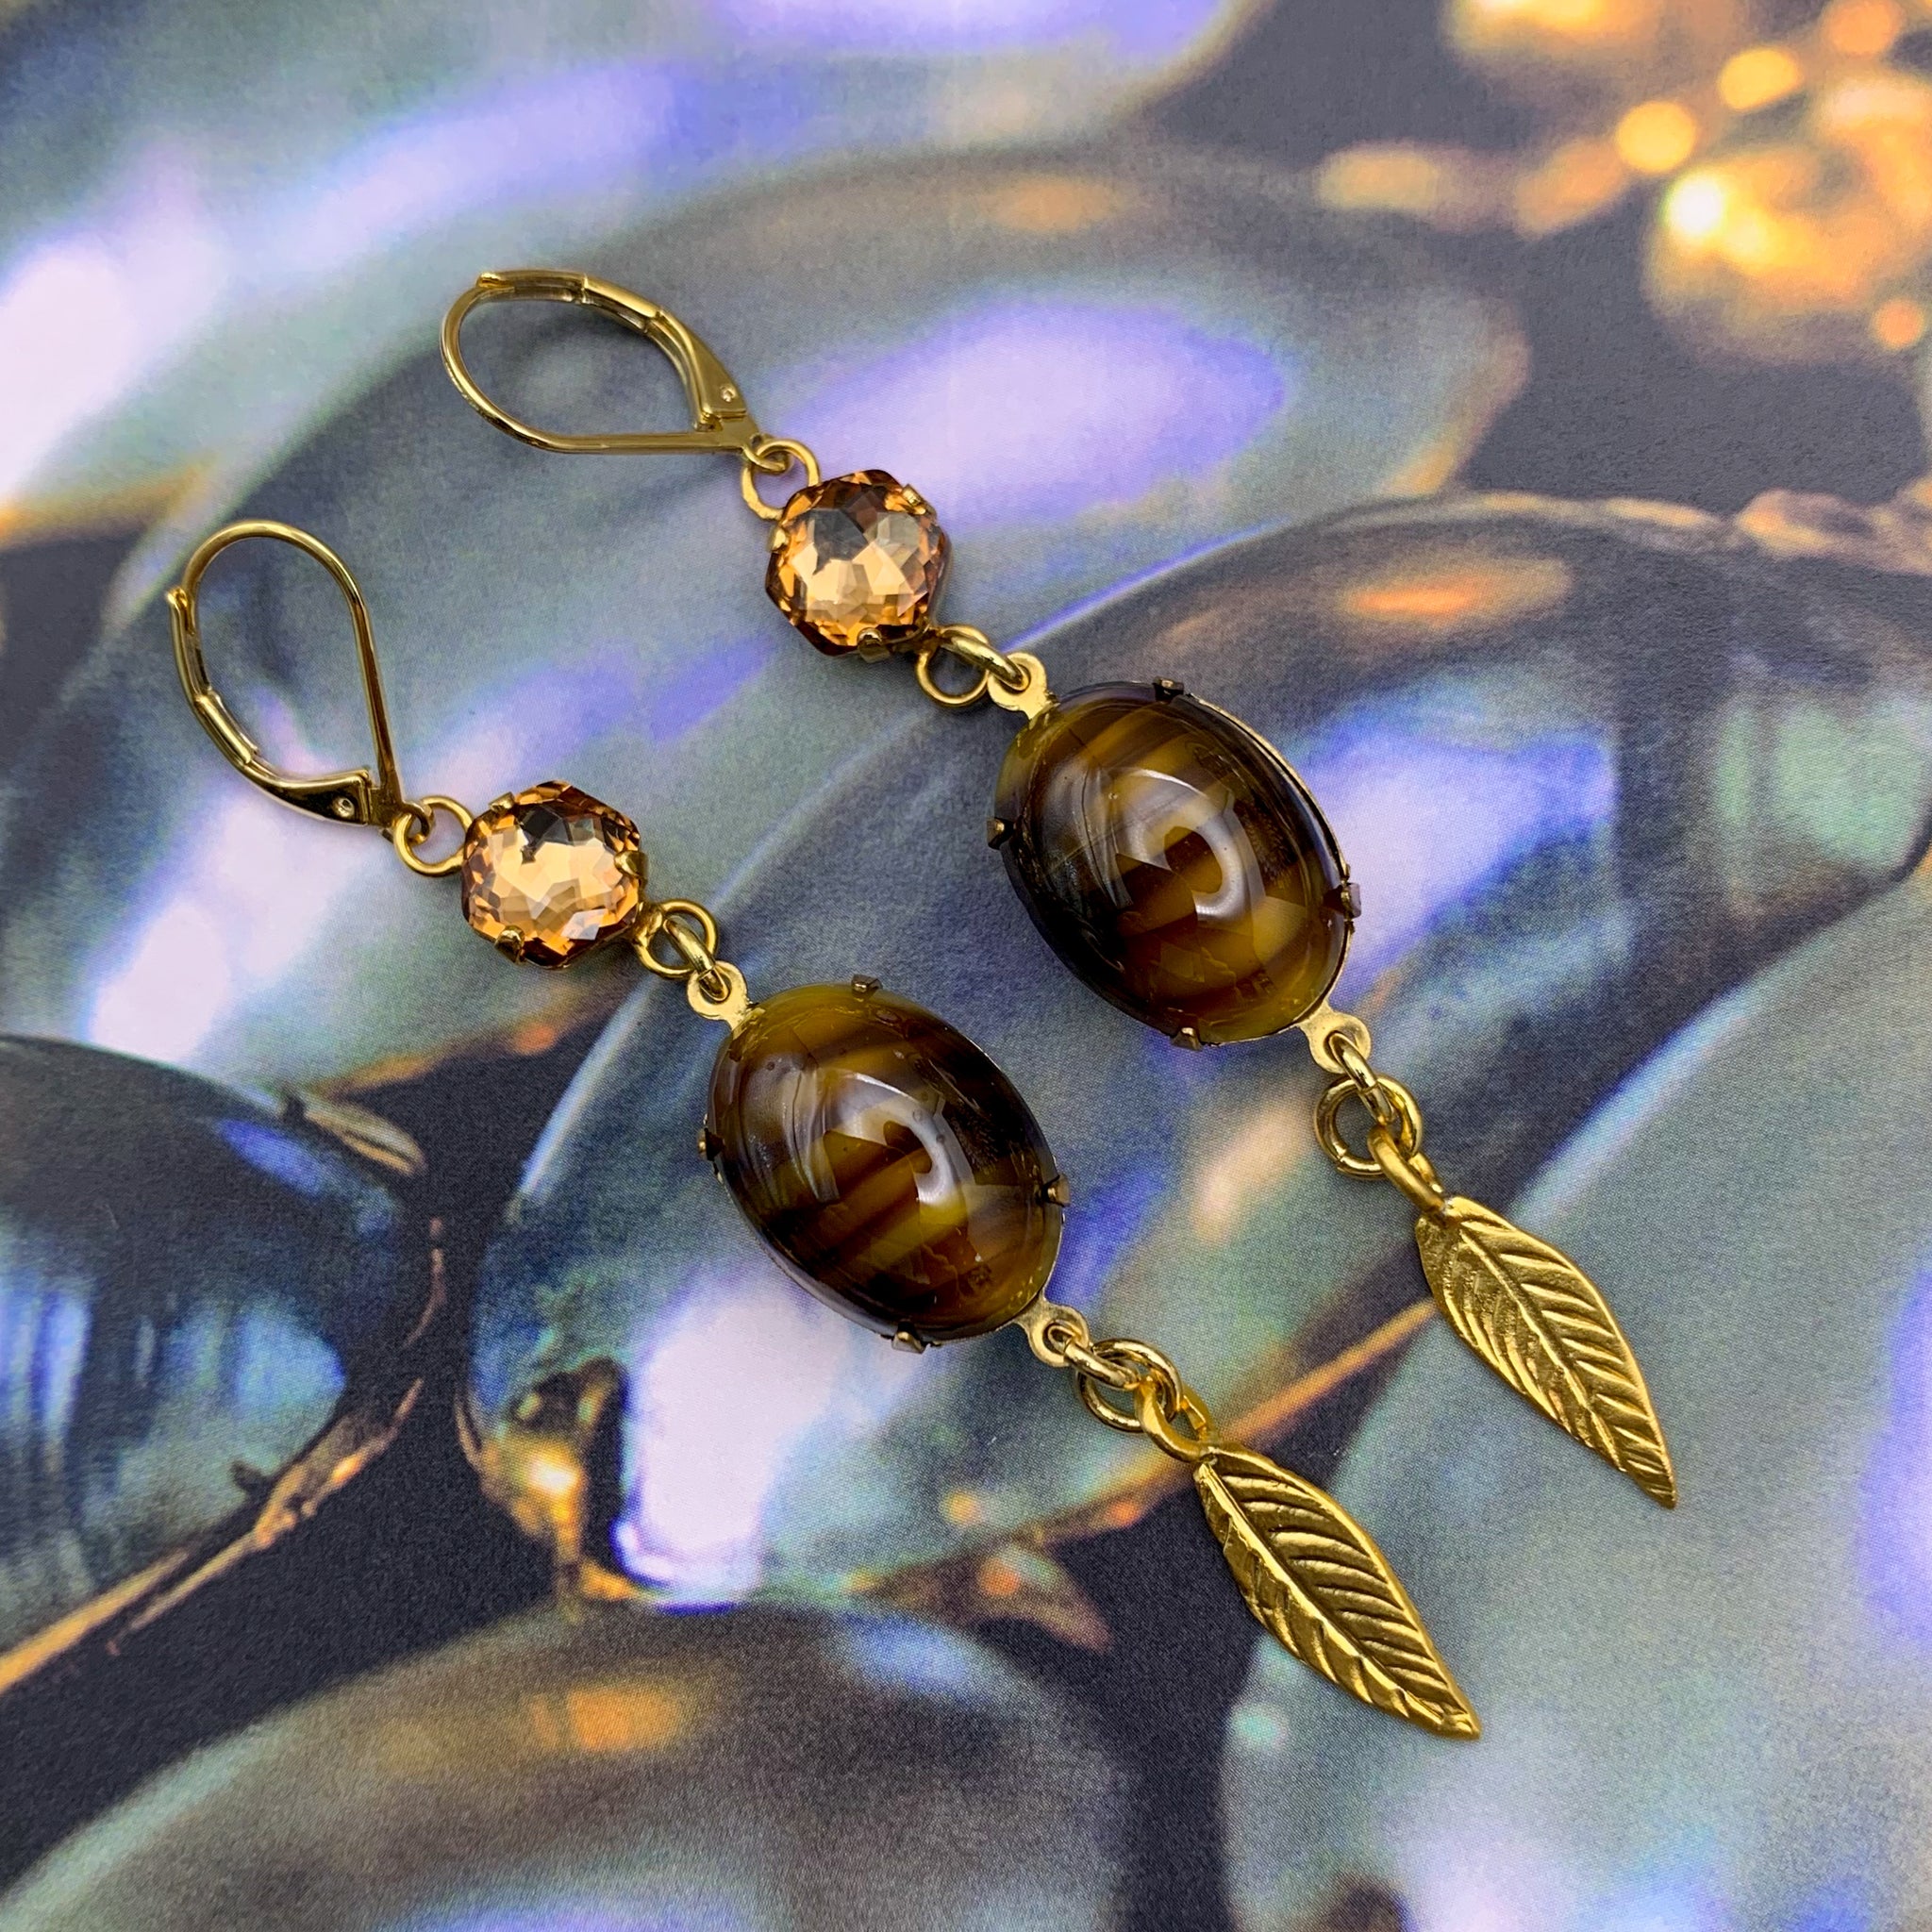 Tiger’s Eye Jewelry | Vintage Style | 22 Carat Gold Filled | Handmade in Australia